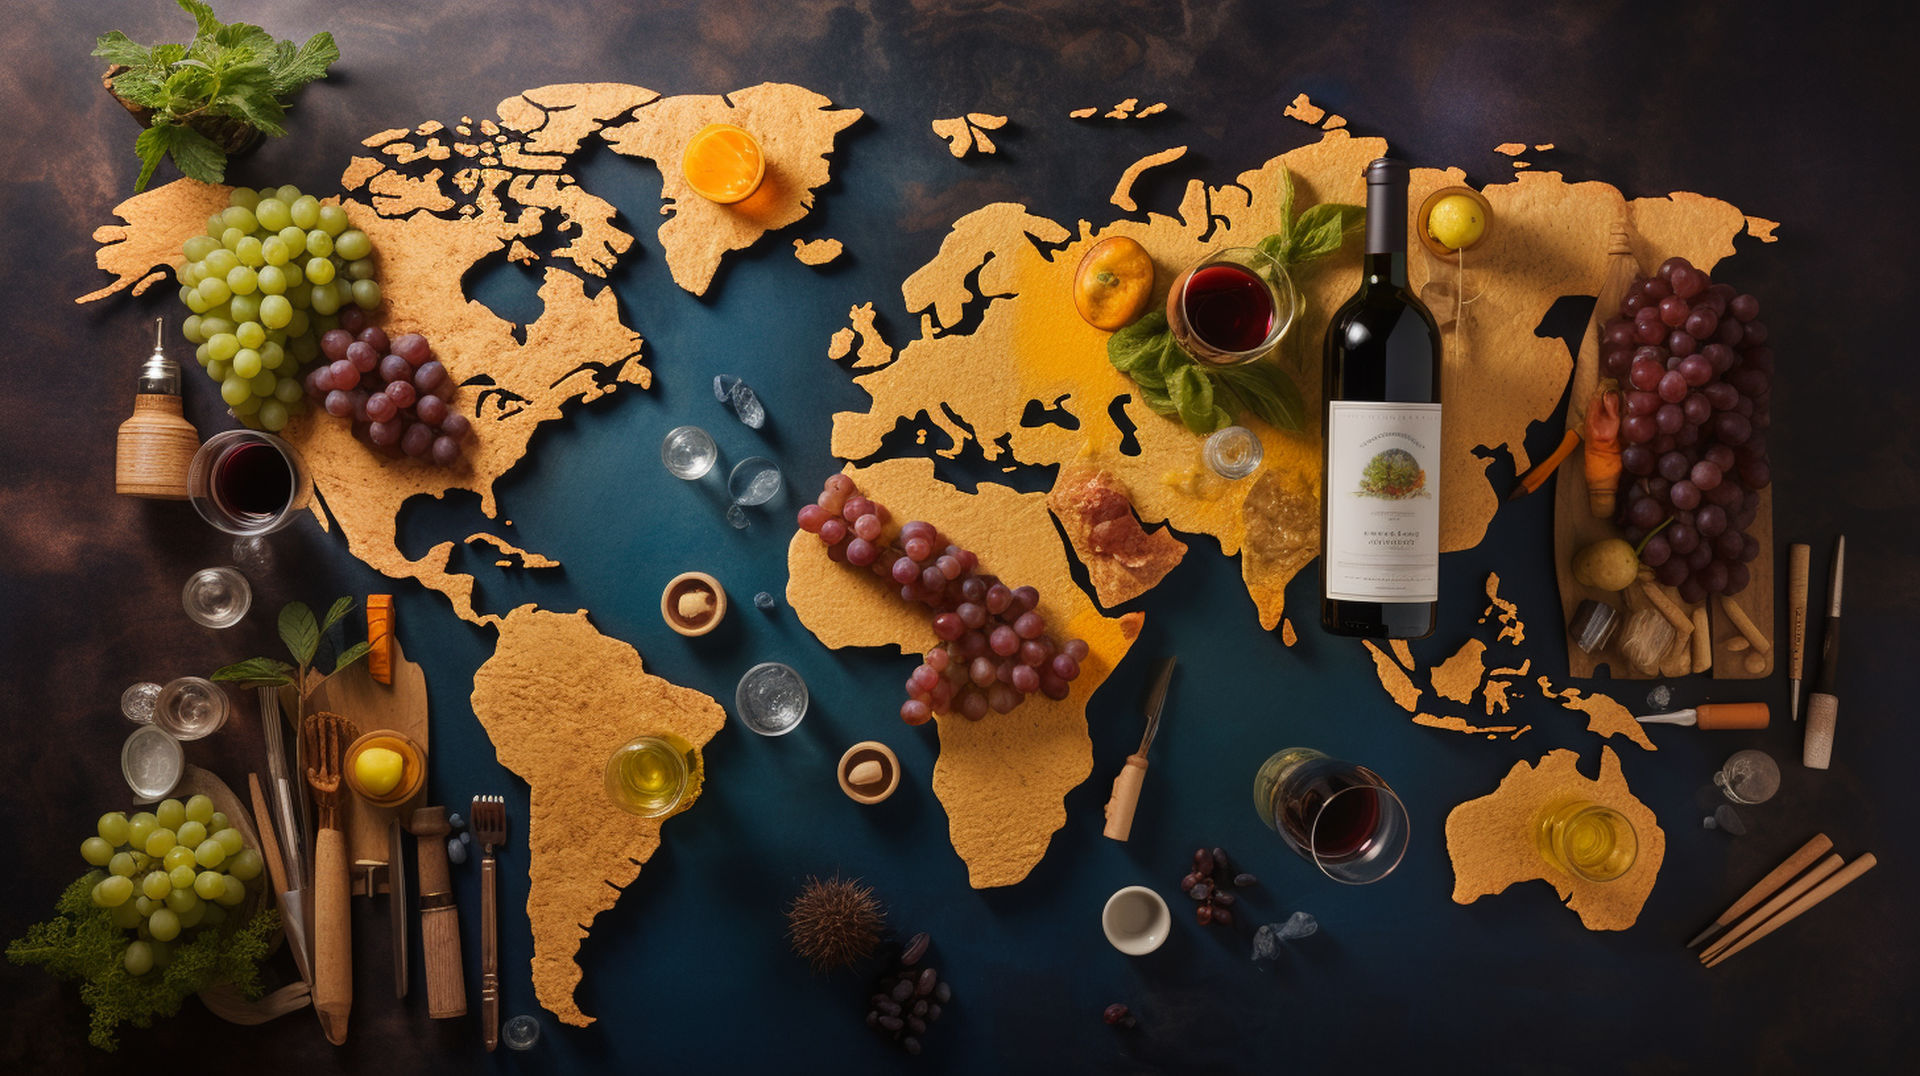  an image featuring a world map, marked with vibrant vineyard landscapes, wine bottles, and grapes, symbolizing key Chardonnay wine regions across the globe.